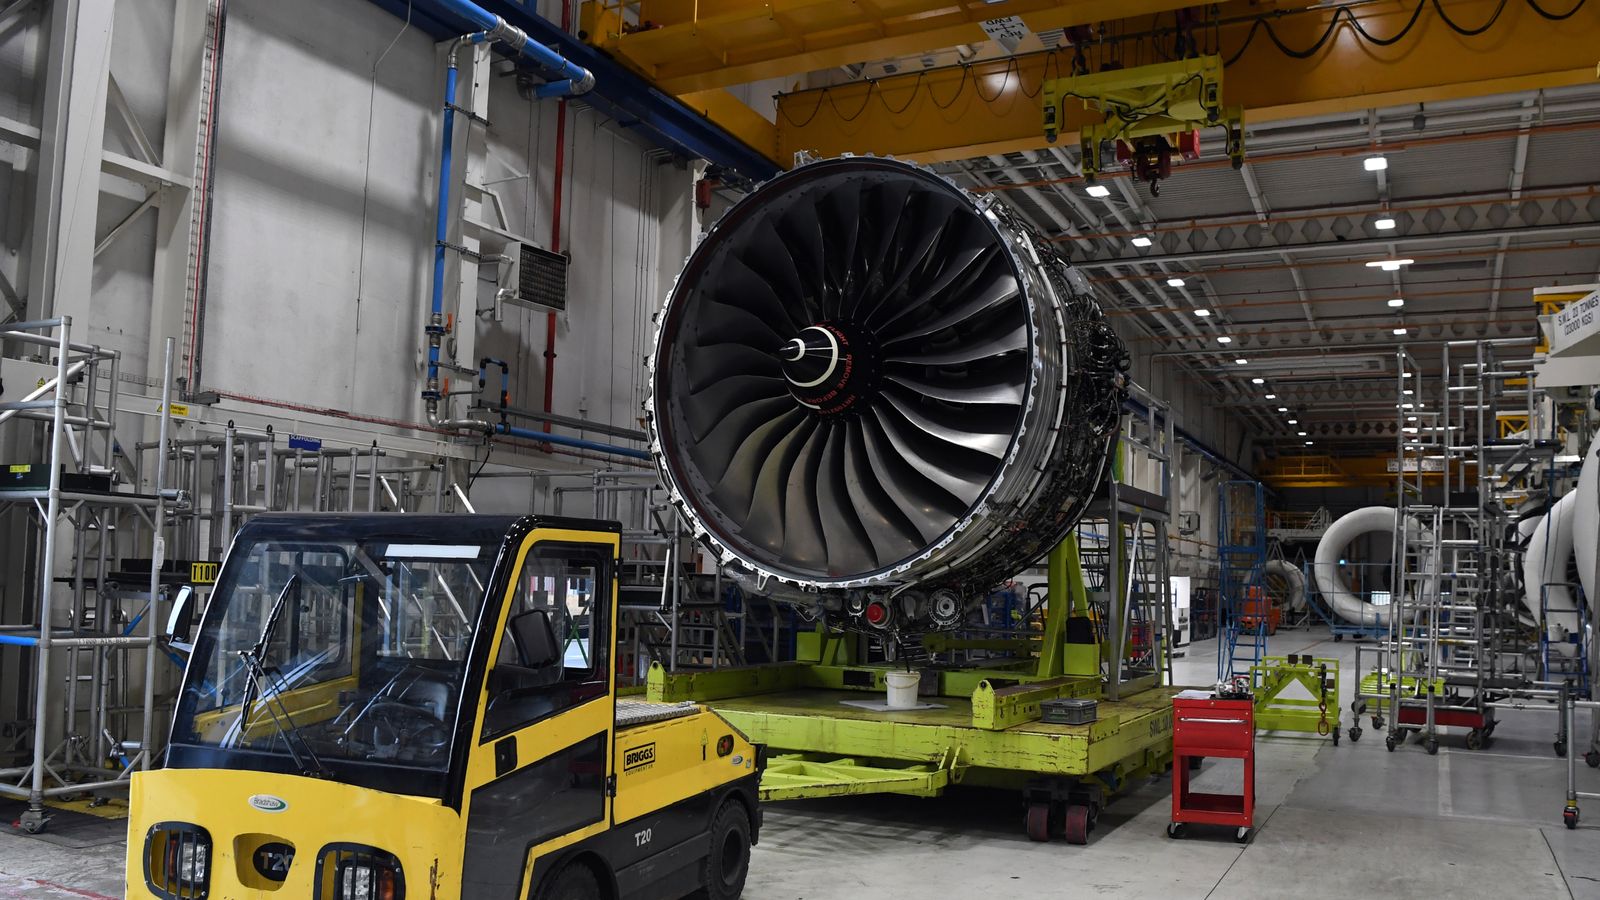 RollsRoyce job cuts could mark turning point in engineering firm's fortunes Business News